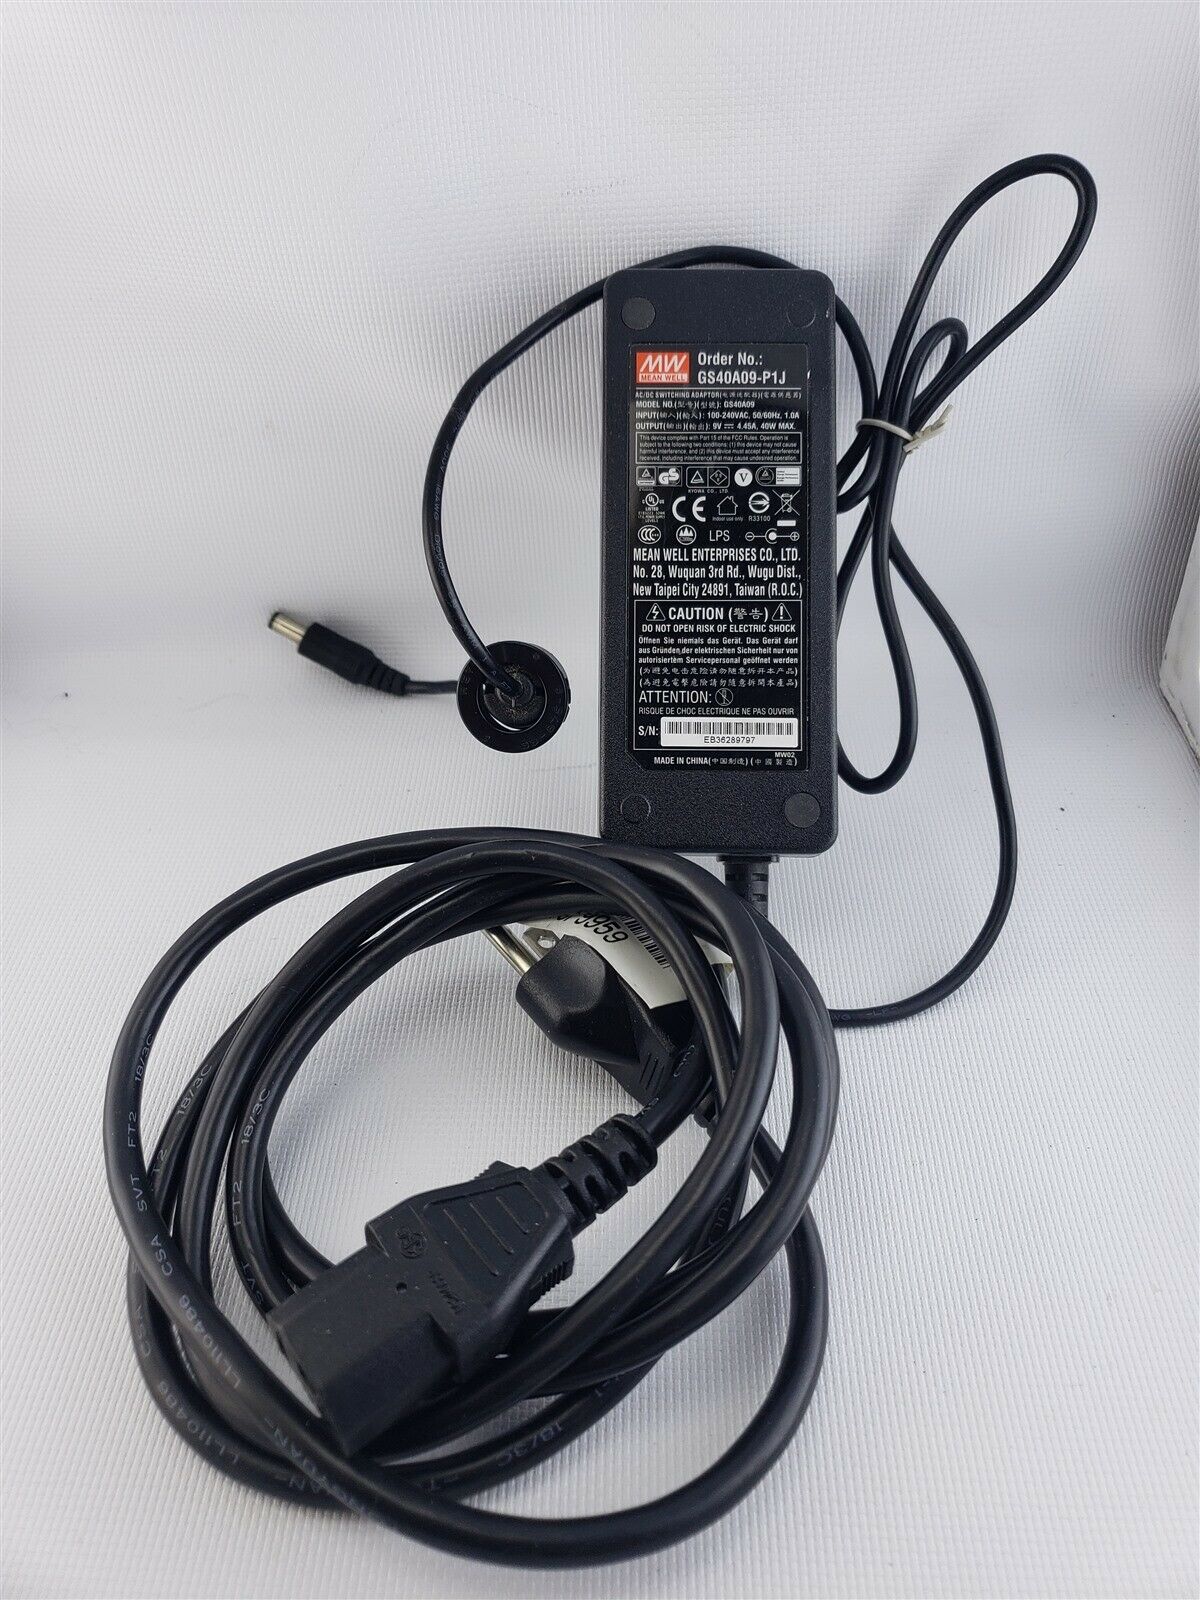 *Brand NEW* Original OEM 12V 4A AC Adapter&Cord for MSI Optix MAG27C LED Gaming Monitor@ Country/Region of Man - Click Image to Close